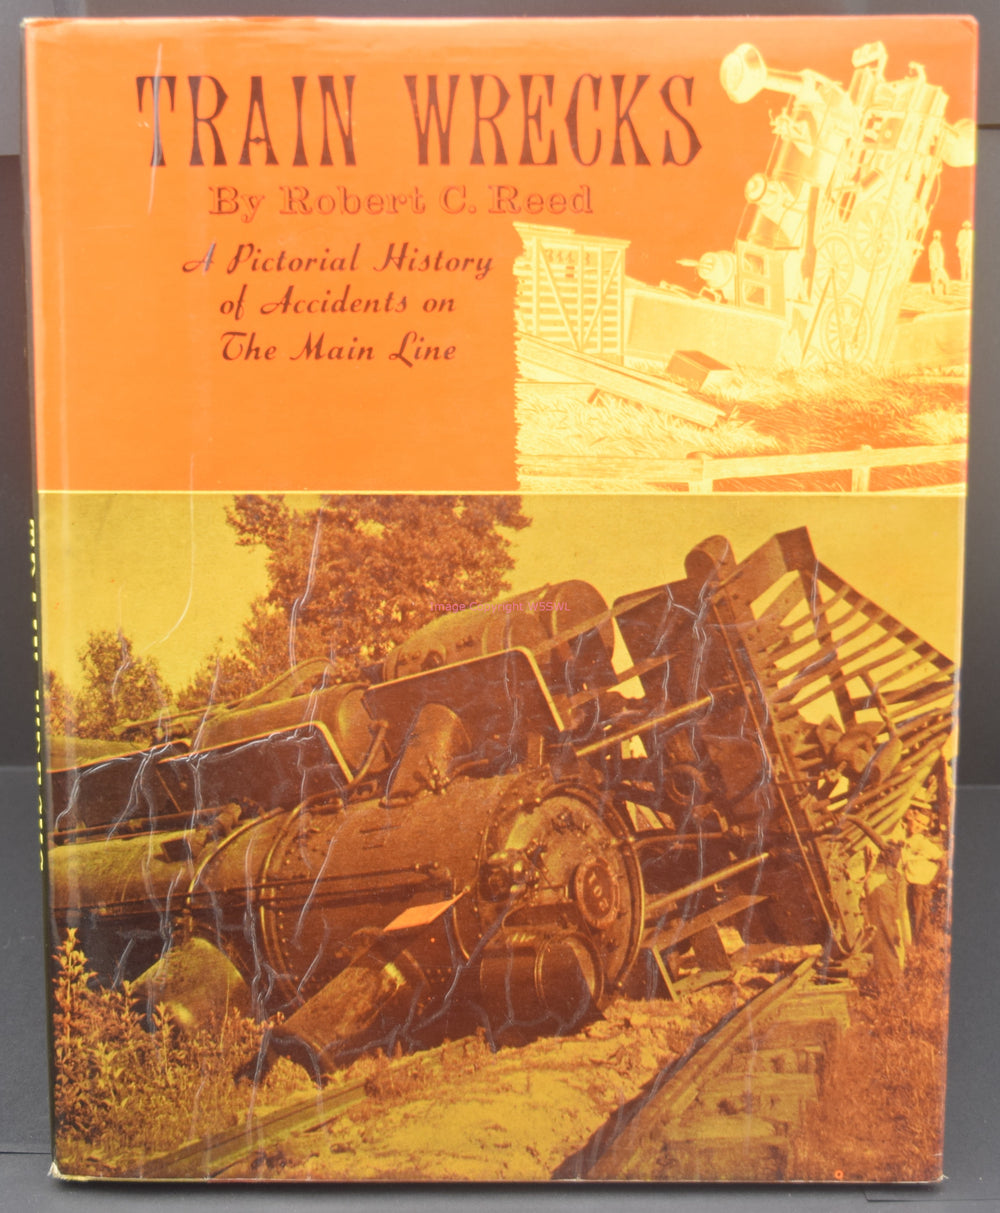 Train Wrecks by Robert Reed - Pictorial History of Accidents on The Main Line - Dave's Hobby Shop by W5SWL